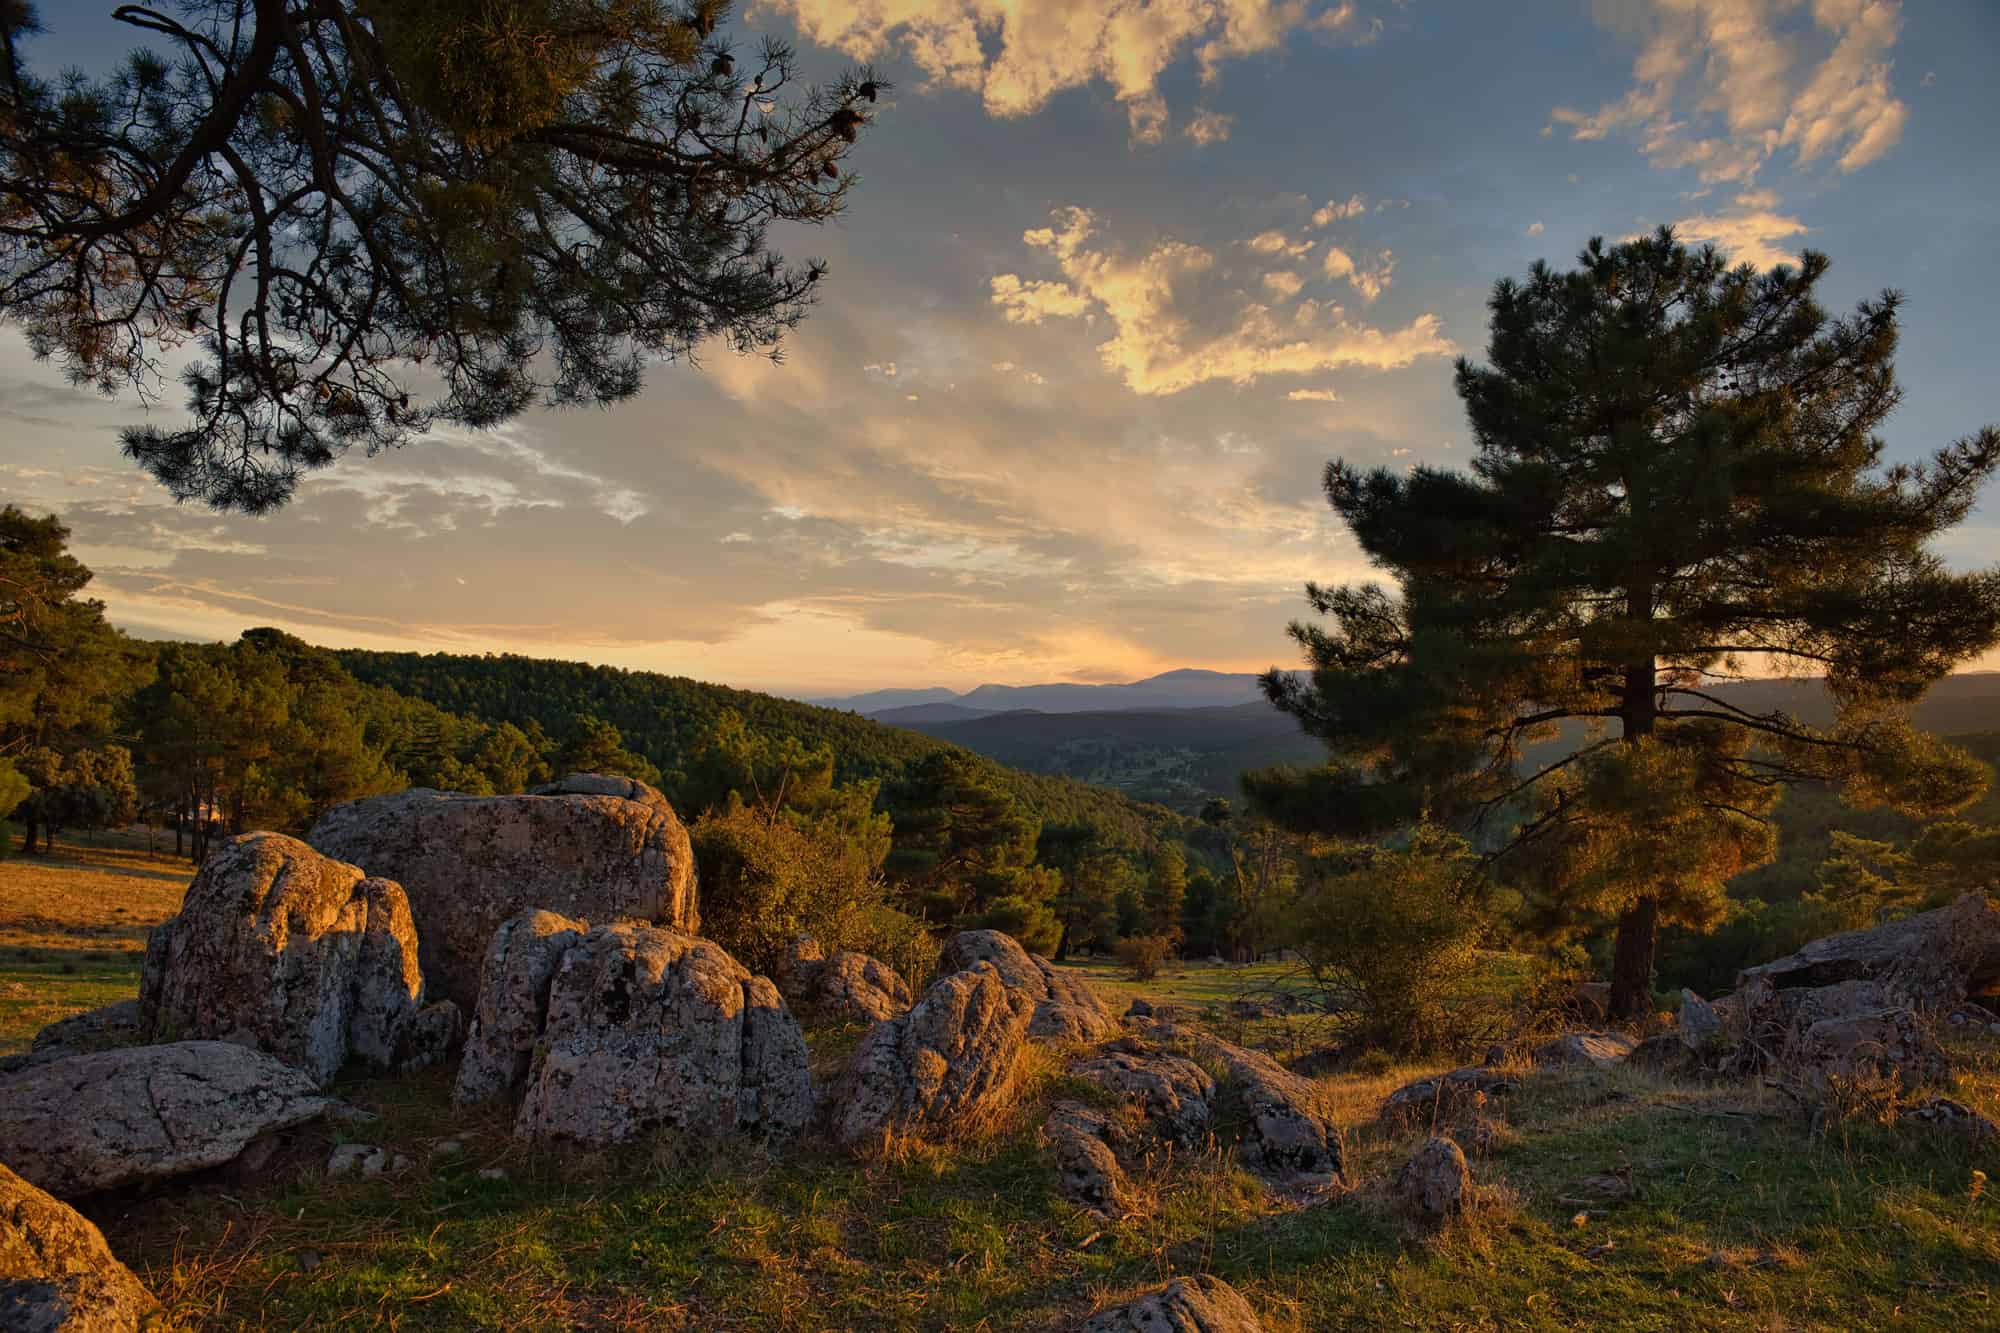 An aerial view of a golden sunset over rocky forests and mountains in the Spanish Countryside